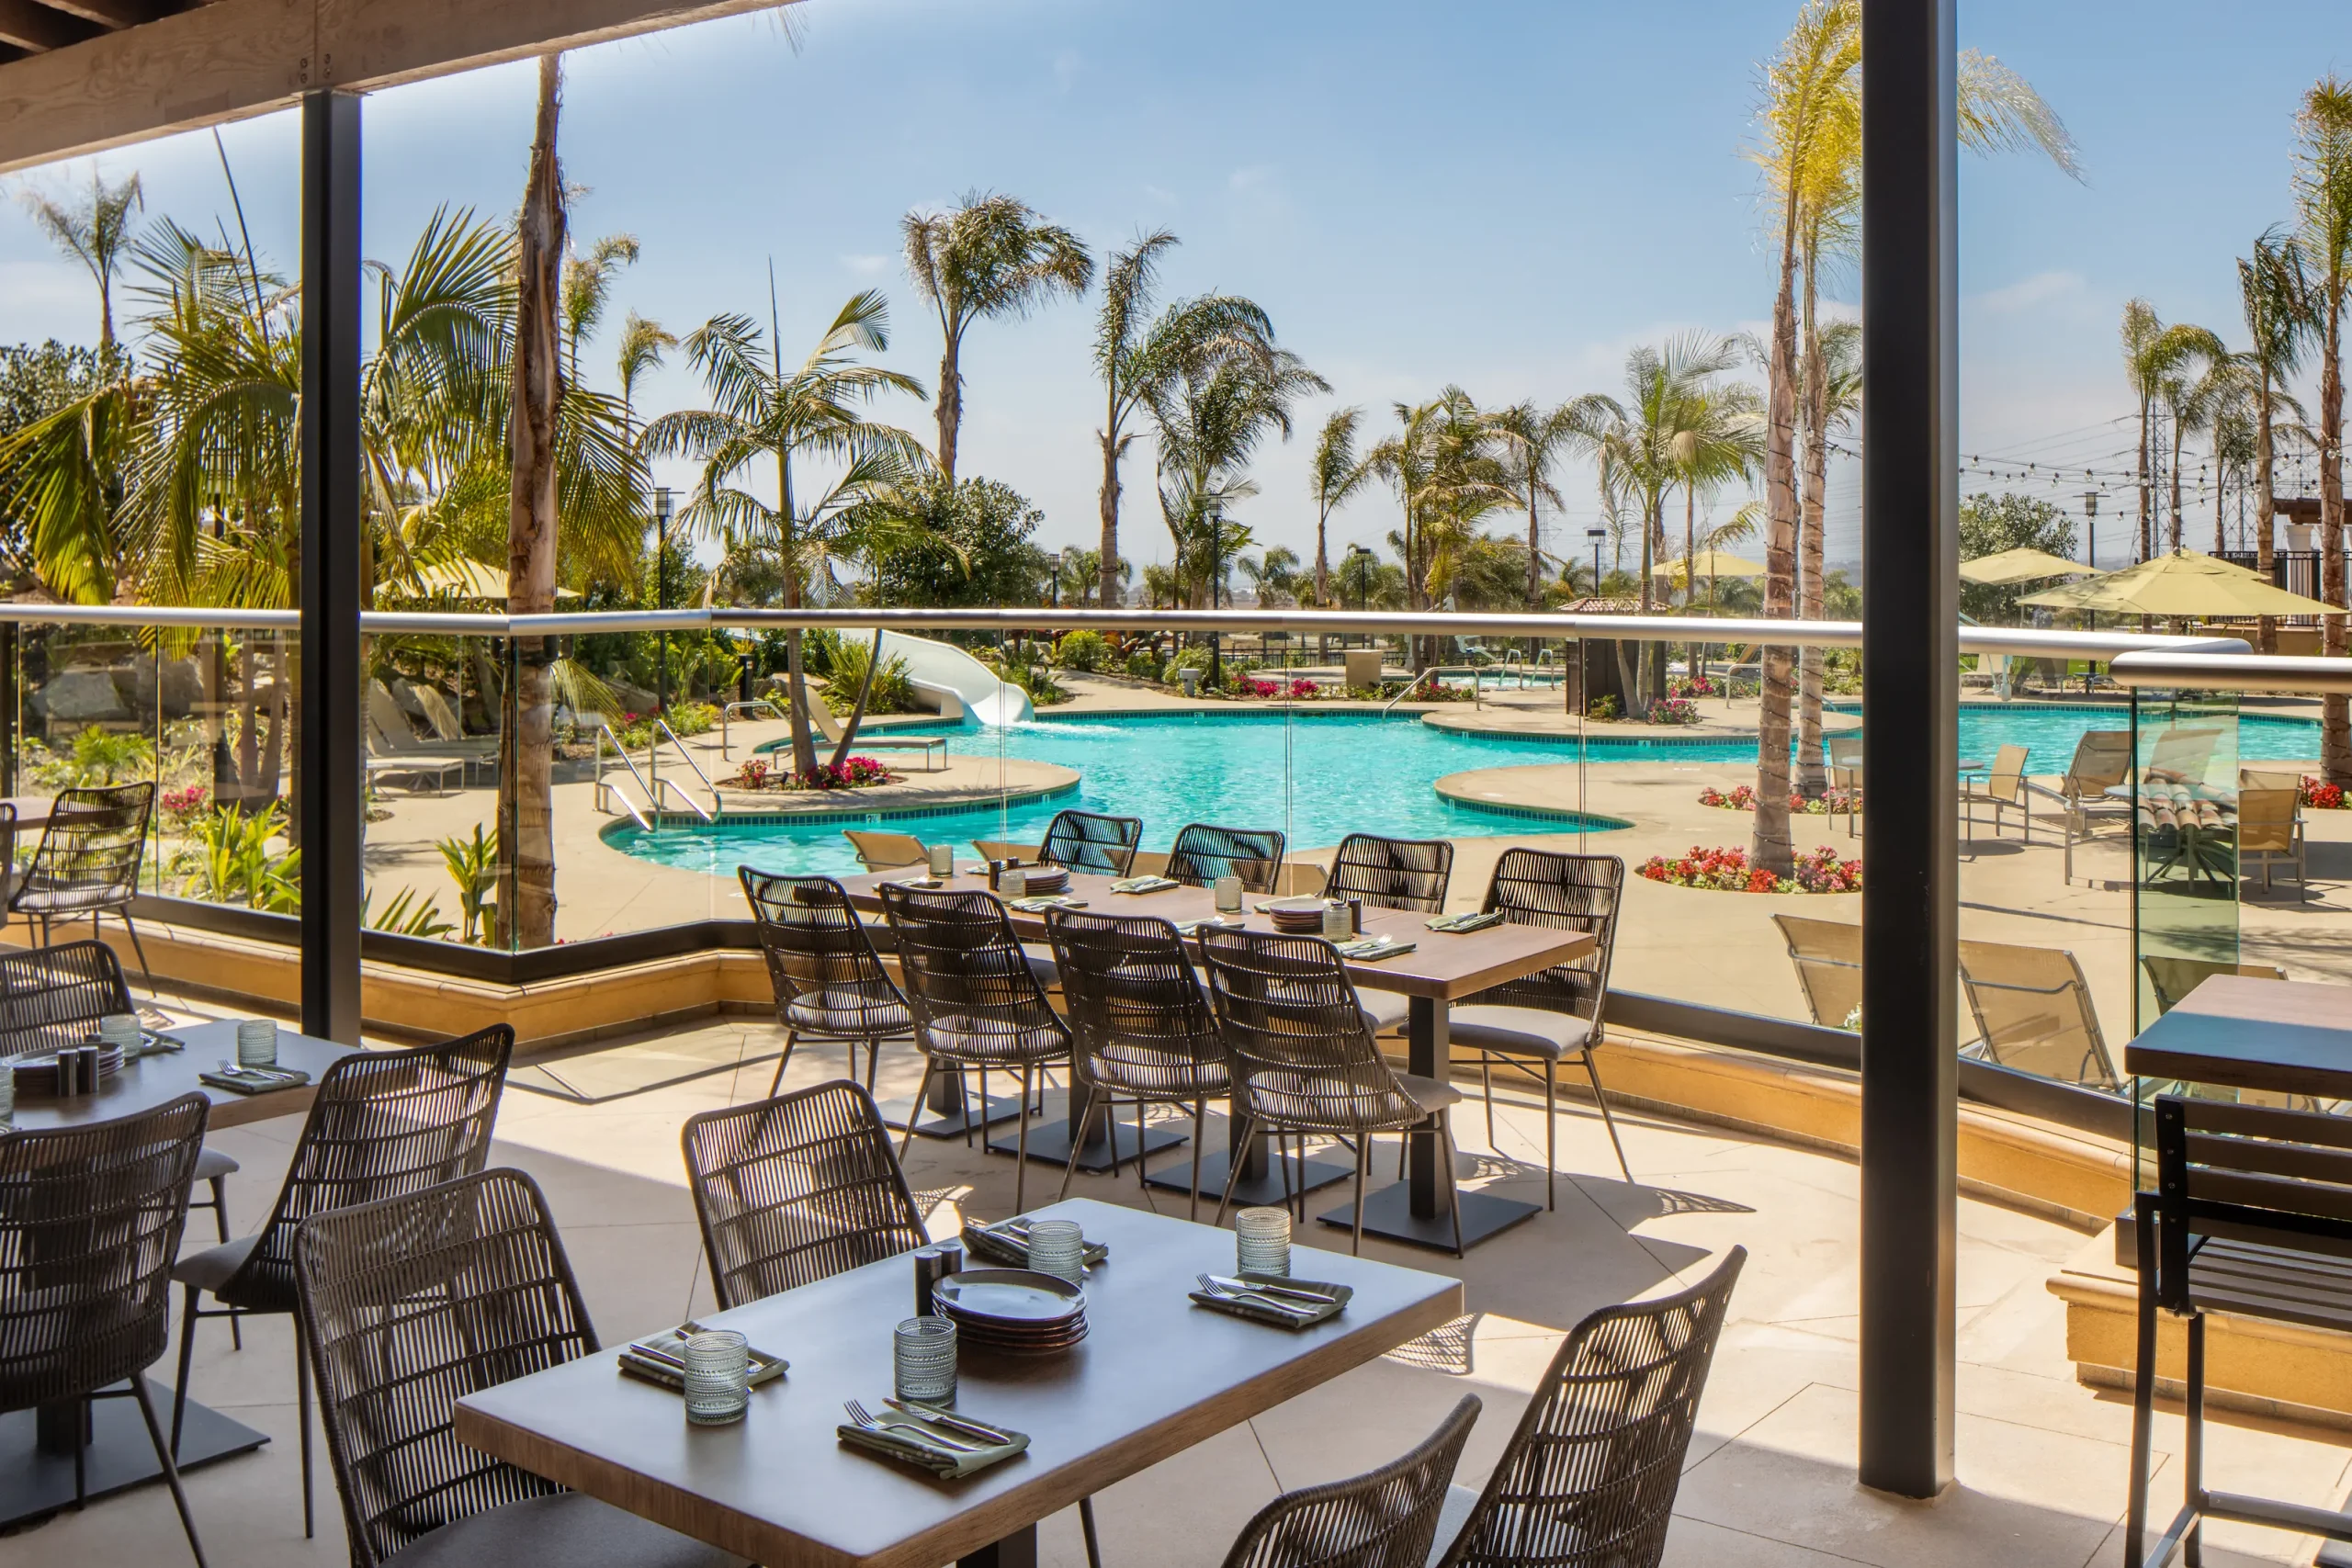 Patio dining seating with overview of hotel swimming pool and palm trees